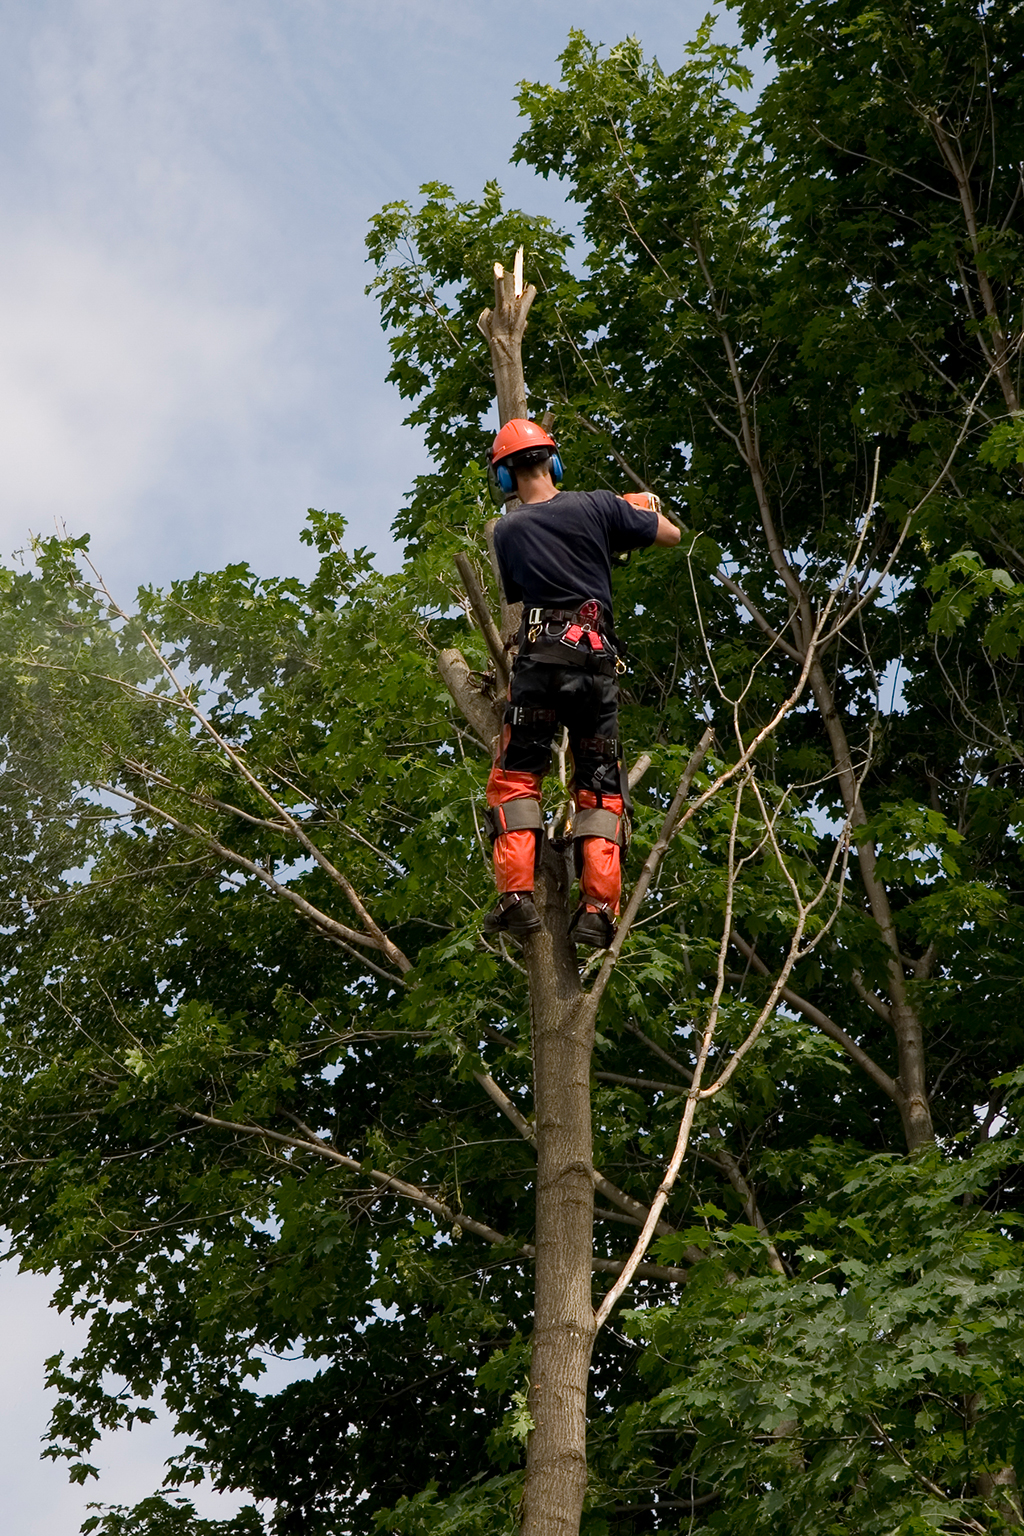 4-Reasons-Why-You-Should-Call-A-Tree-Removal-Service-_-Dallas,-TX